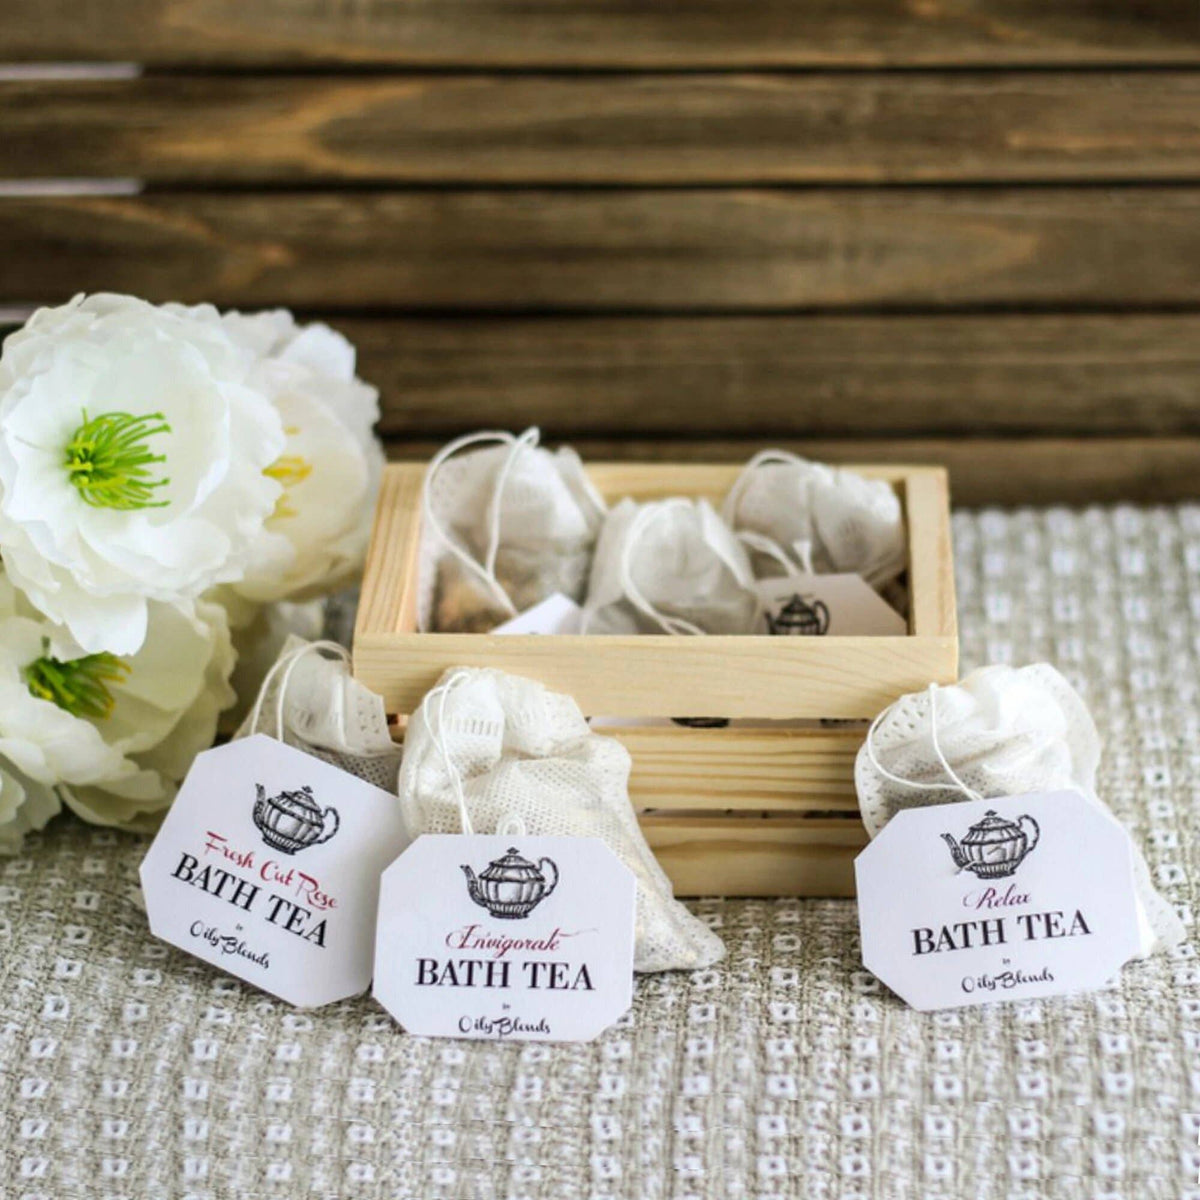 A wooden crate holding small pouches labeled "Hampton Court herbal bath tea," alongside large white flowers on a textured surface. The setting conveys a serene, spa-like atmosphere.